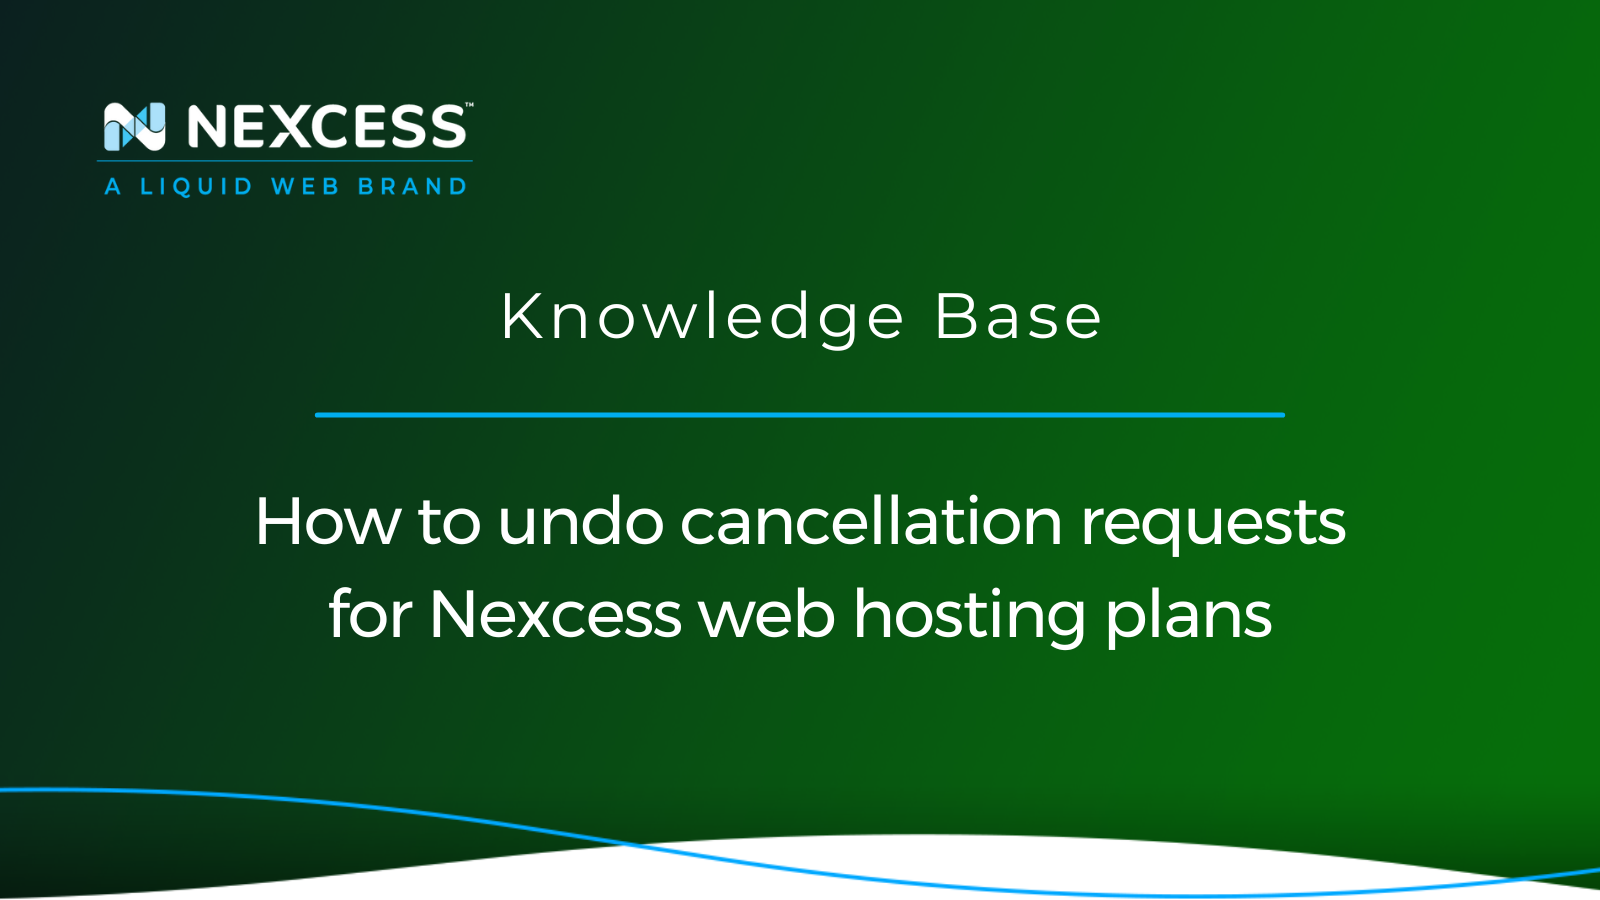 How to undo cancellation requests for Nexcess web hosting plans